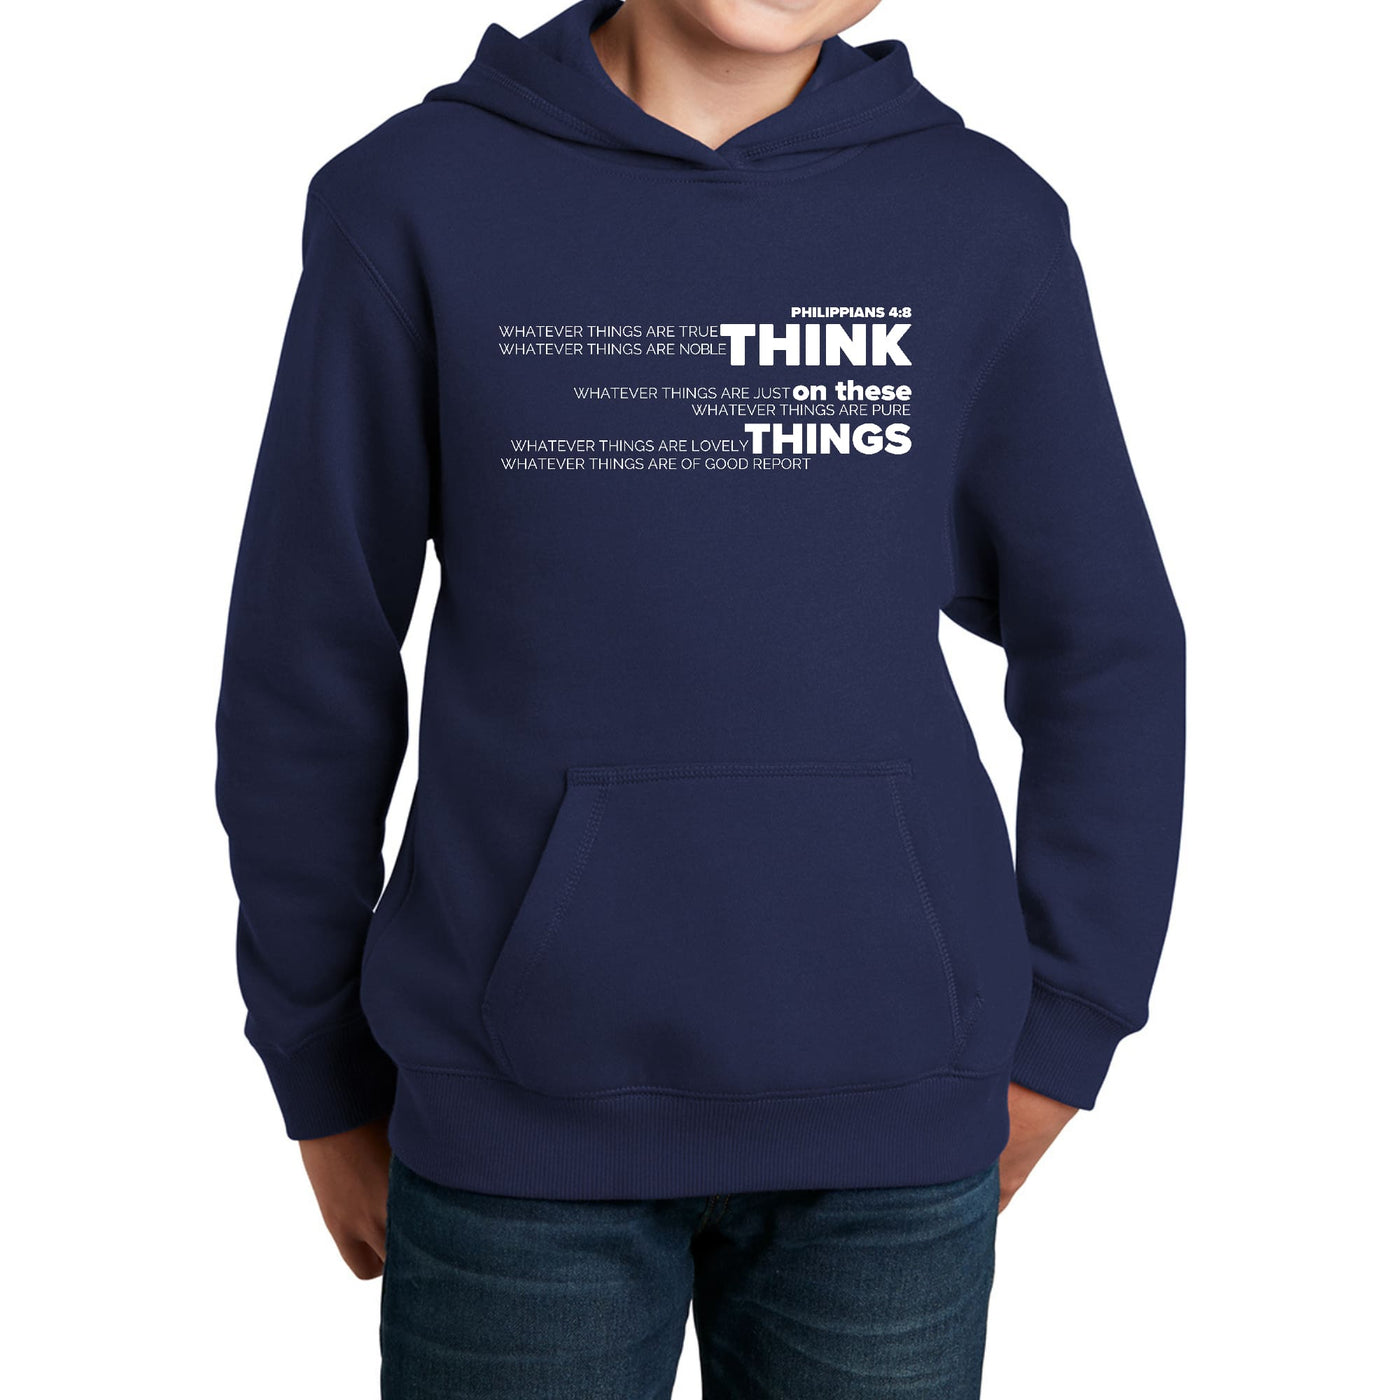 Youth Long Sleeve Hoodie Think On These Things - Youth | Hoodies